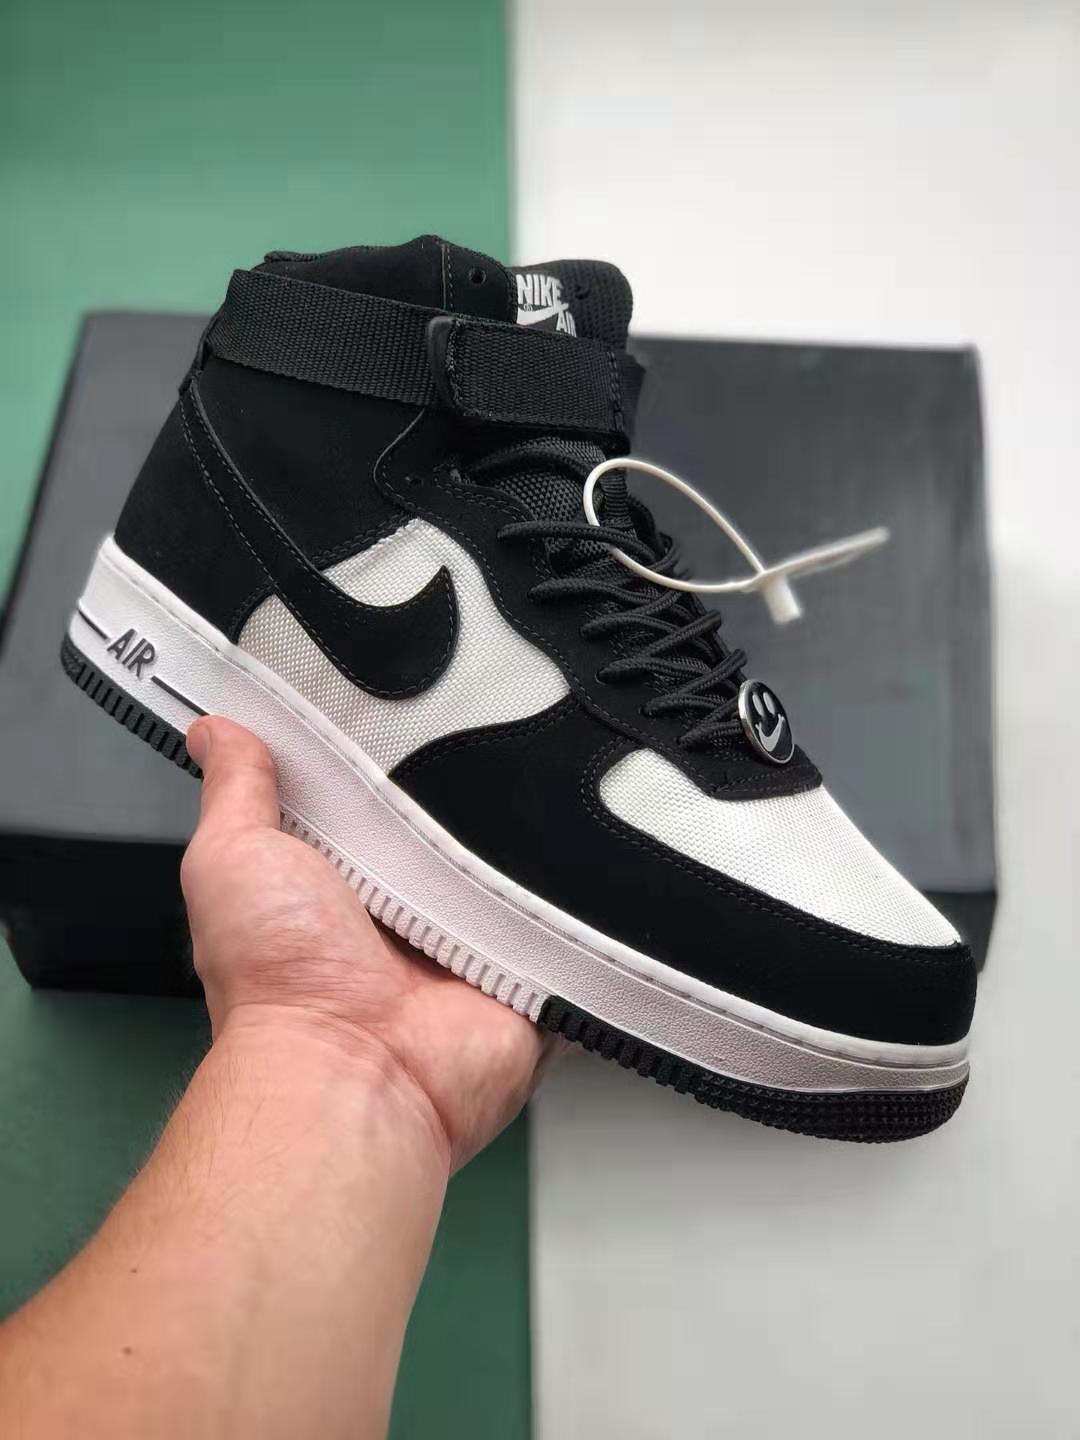 Nike Air Force 1 High 07 LV8 Have a Nike Day Black White CI2306-302 | Limited Edition Sneakers